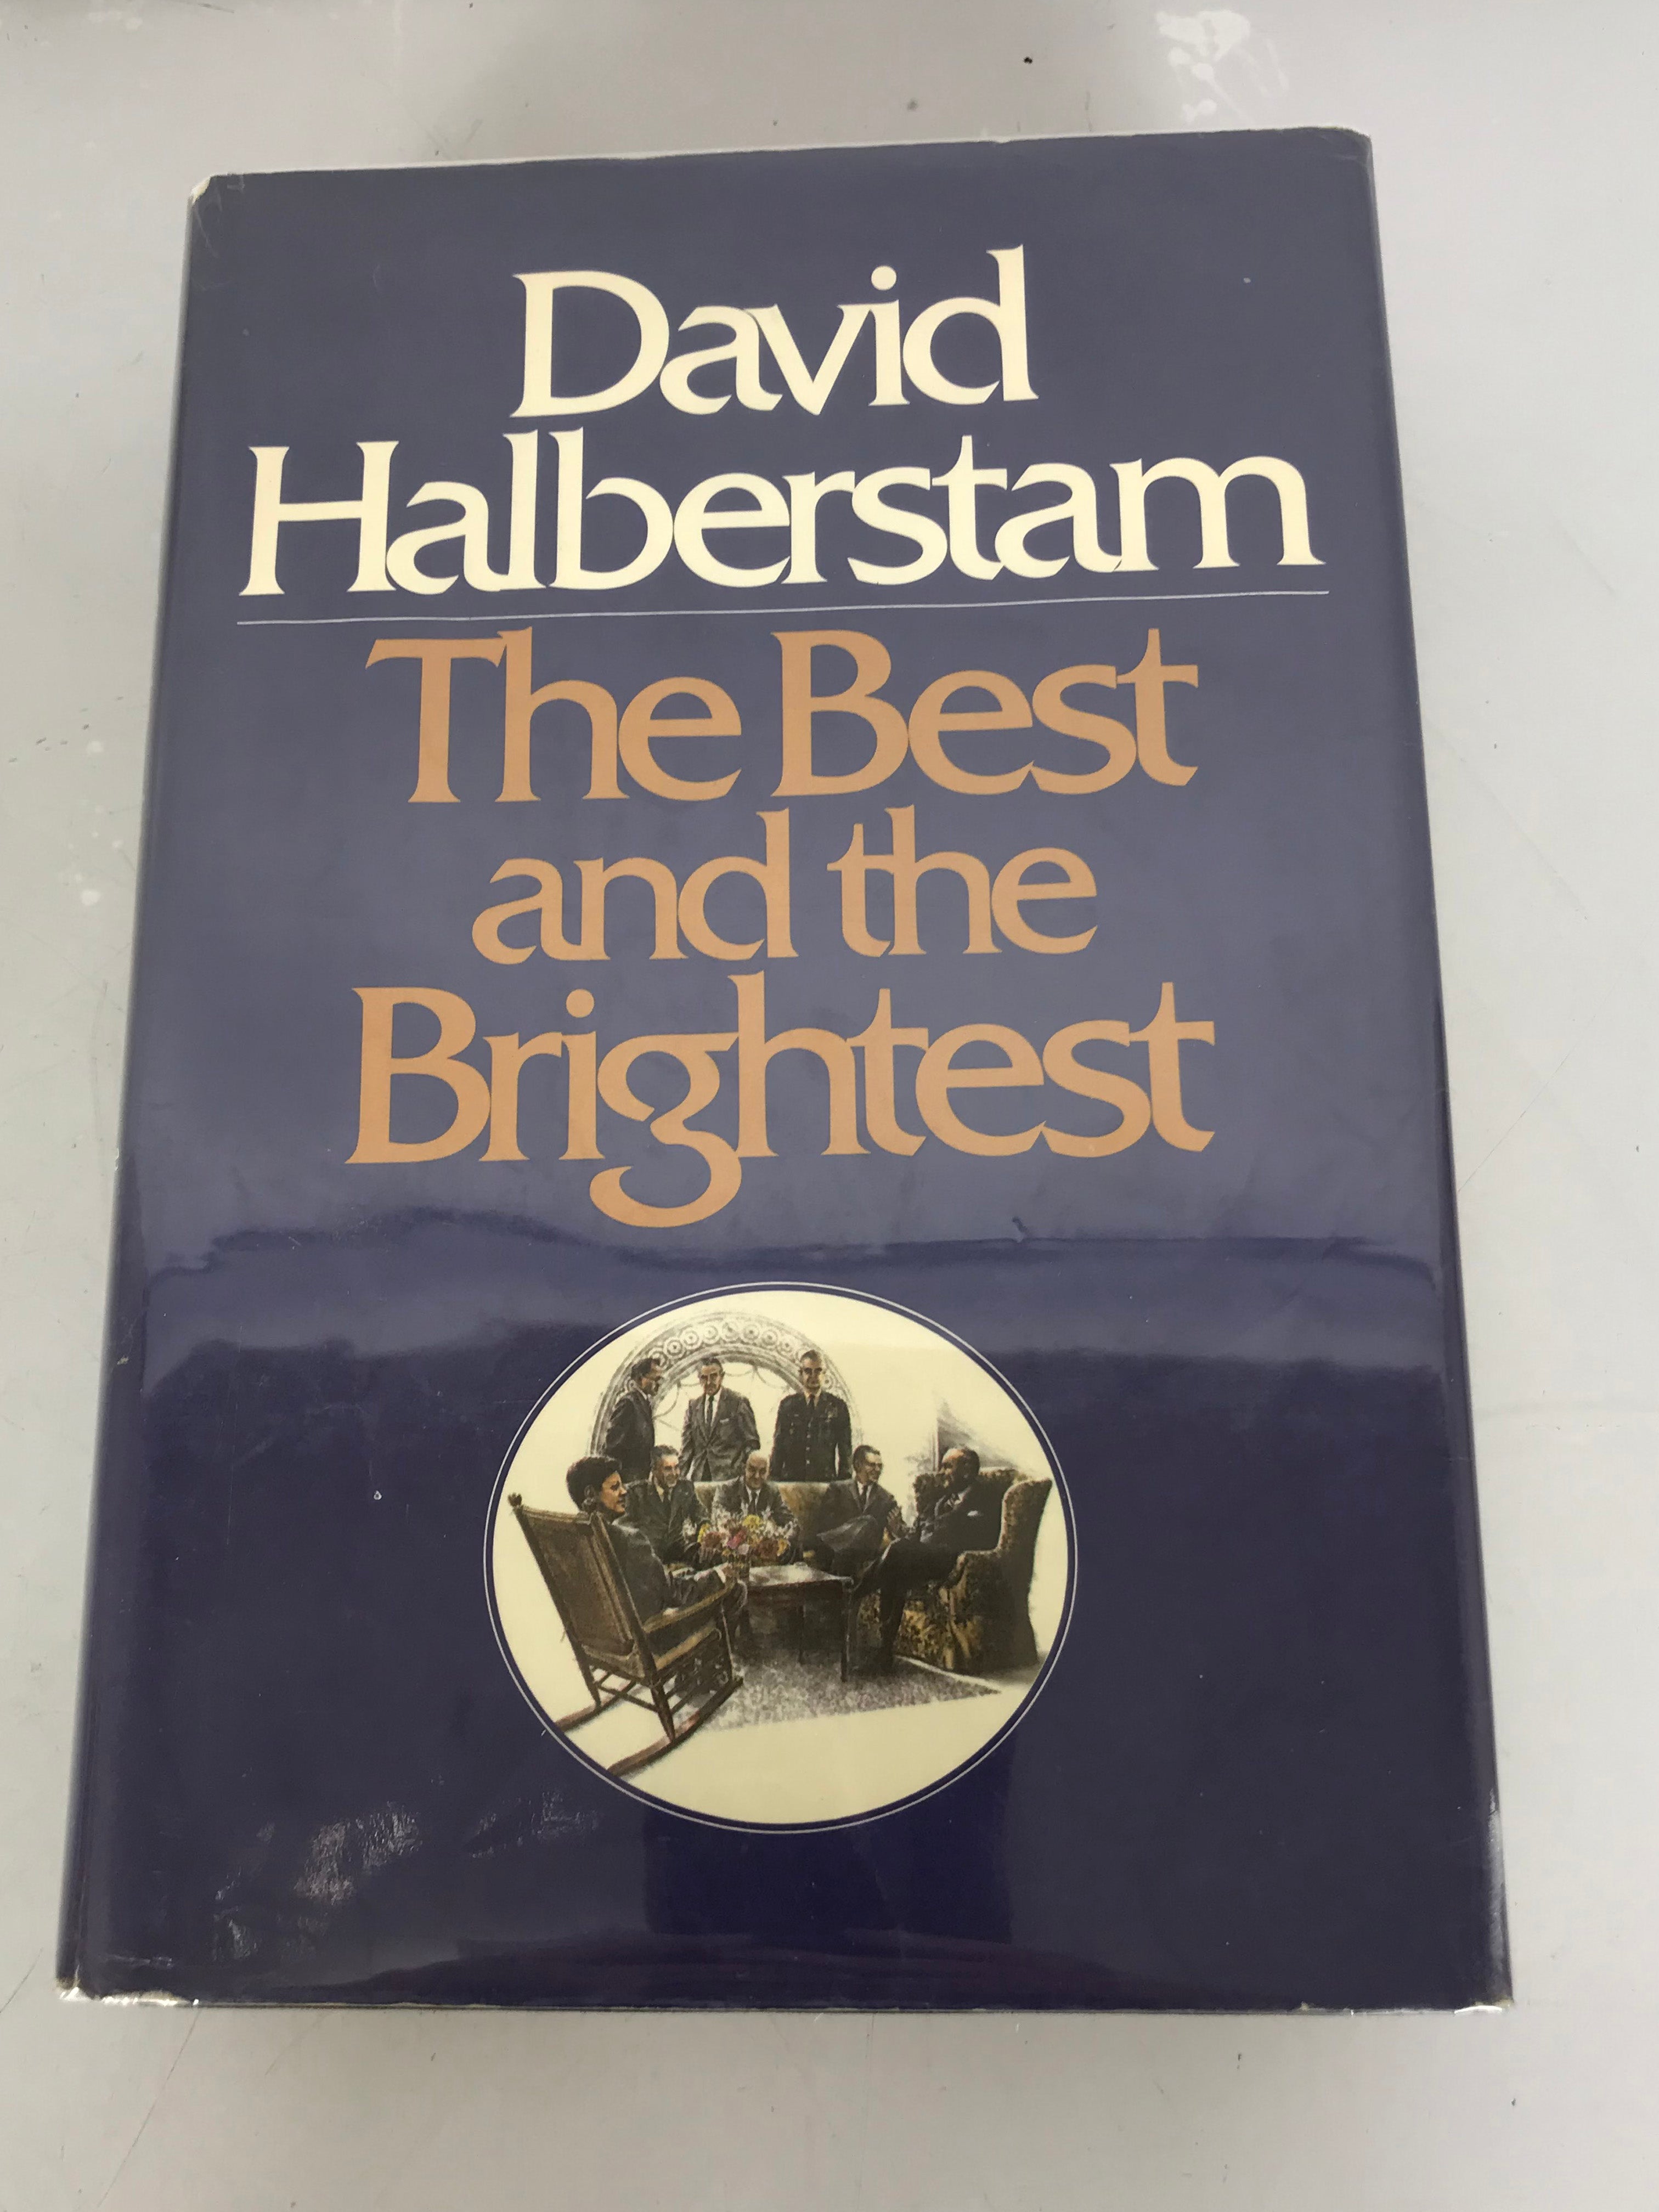 Lot of 7 David Halberstam  Books Including First Editions and Signed Copies HC DJ